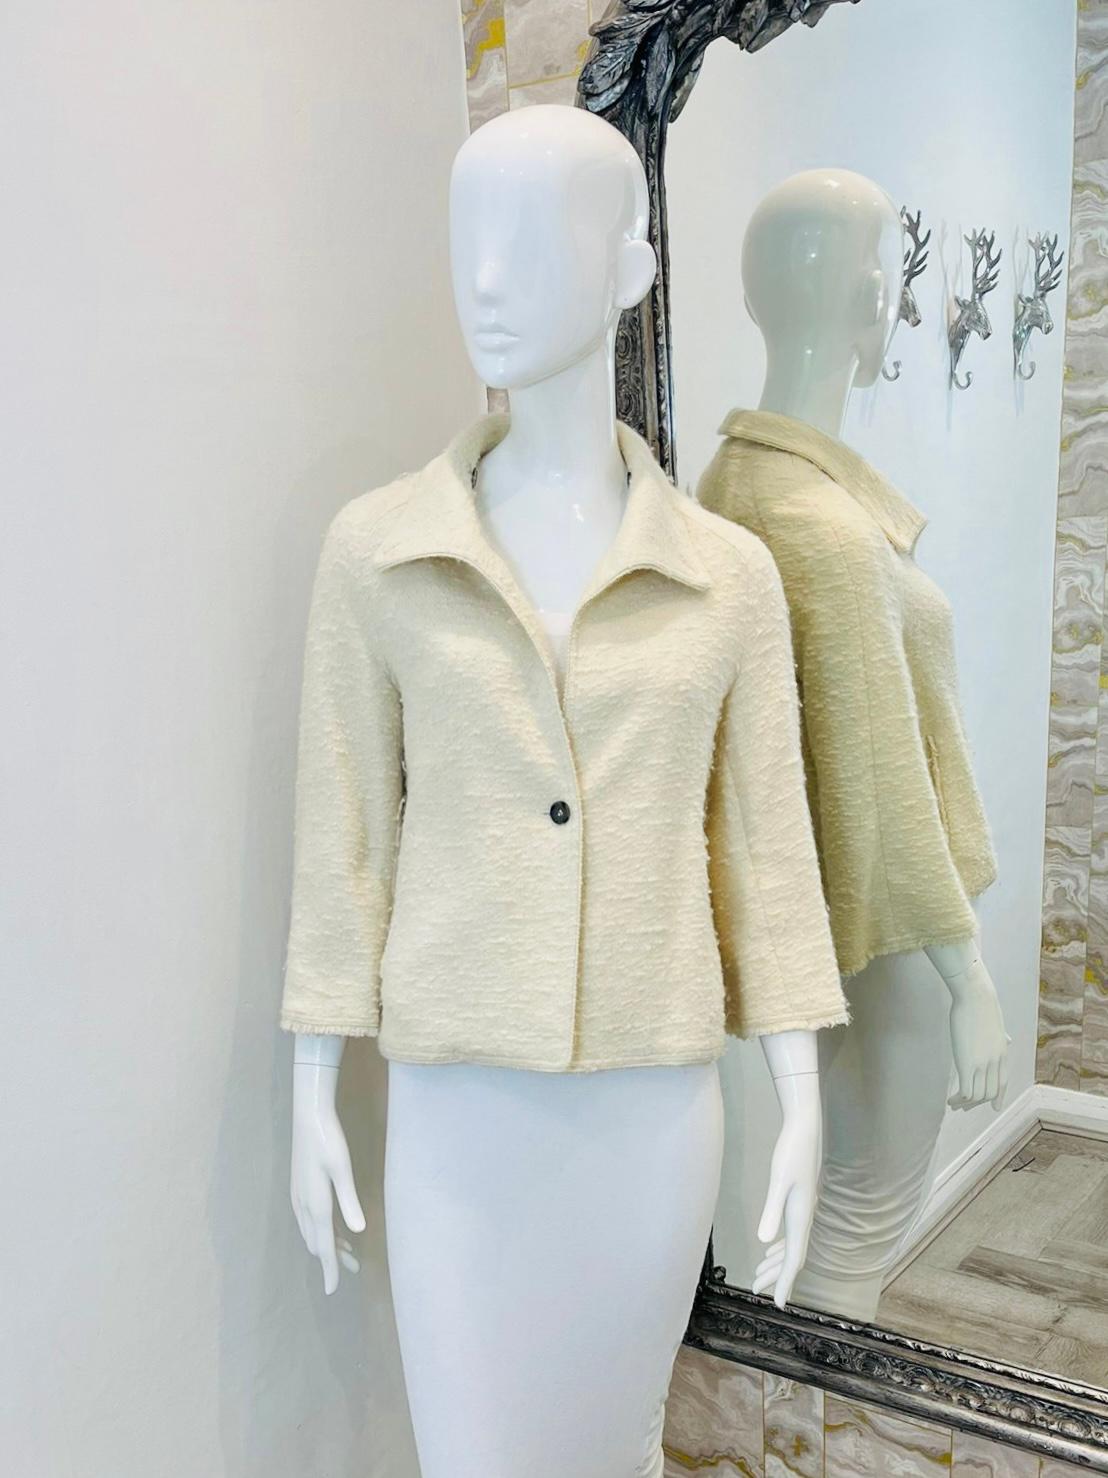 Isabel Marant Baby Alpaca Wool Jacket

Ivory/cream coloured, button closure, cropped jacket.

Size - 34FR

Condition - Excellent

Composition - Baby Alpaca